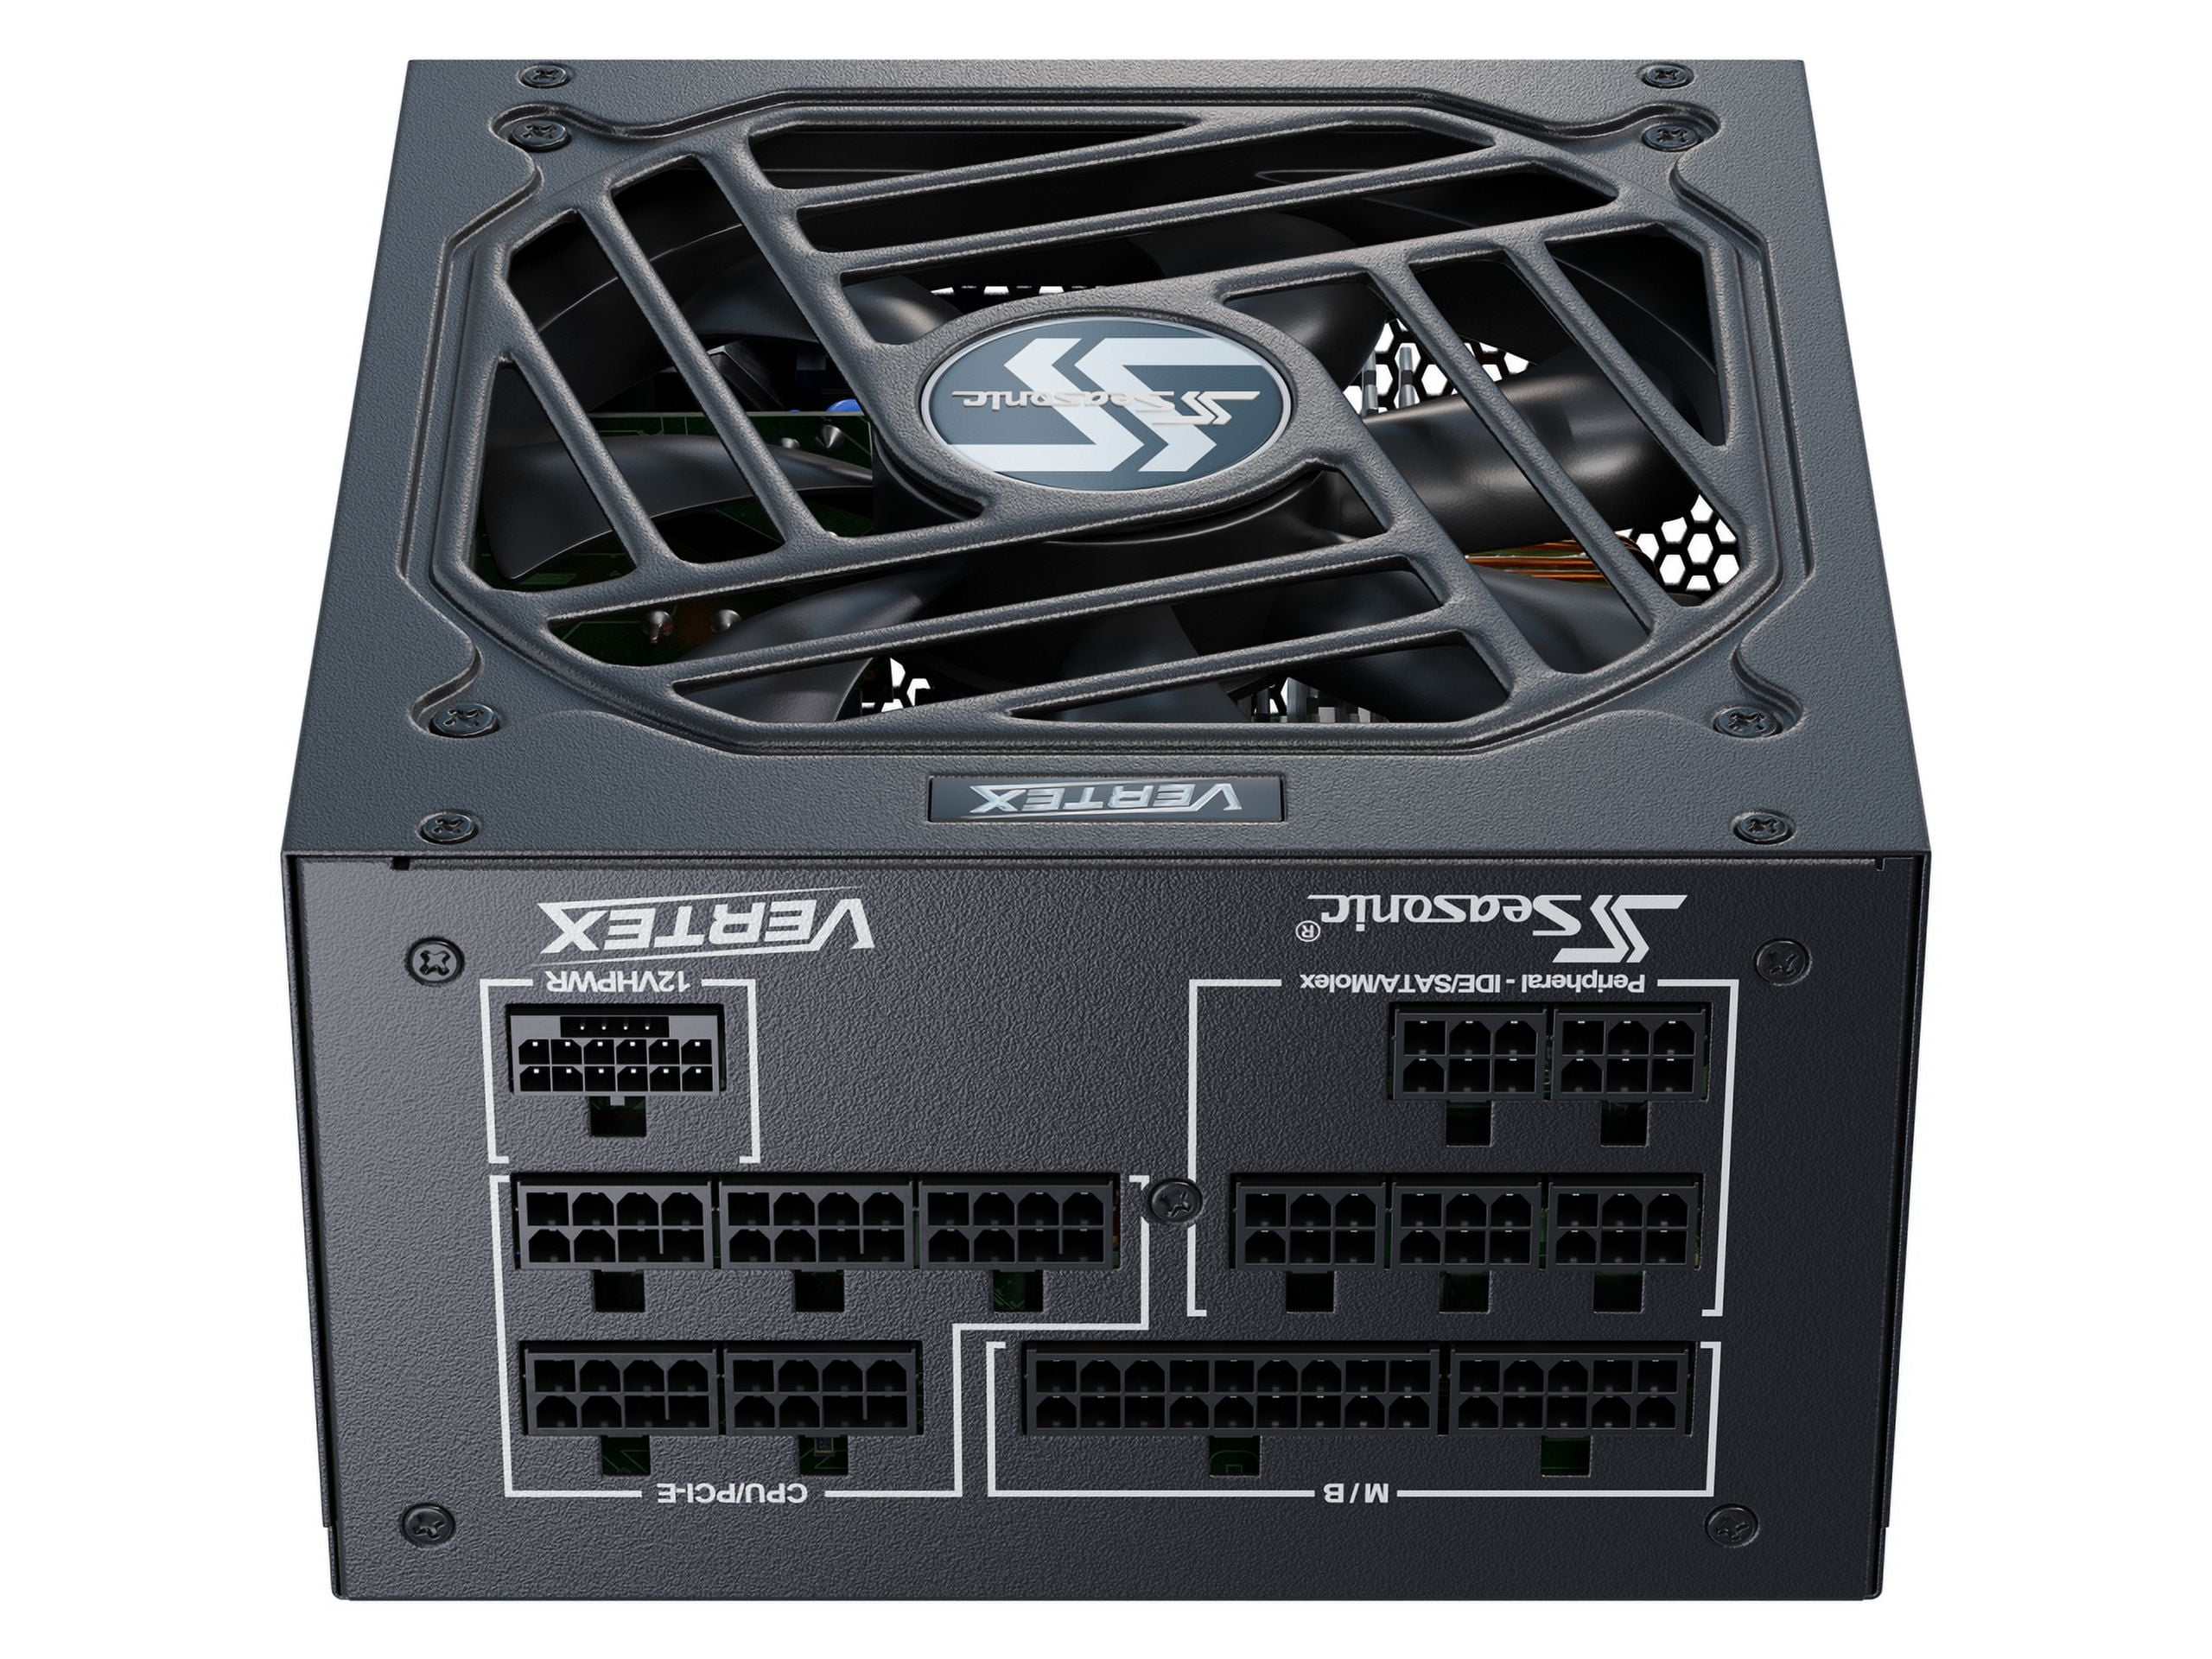 Seasonic VERTEX PX-850, 850W 80+ Platinum, ATX 3.0 / PCIe 5.0 Compliant,  Full Modular, Fan Control in Fanless, Silent, and Cooling Mode, PSU for  Gaming and High-Performance Systems, 12851PXAFS 